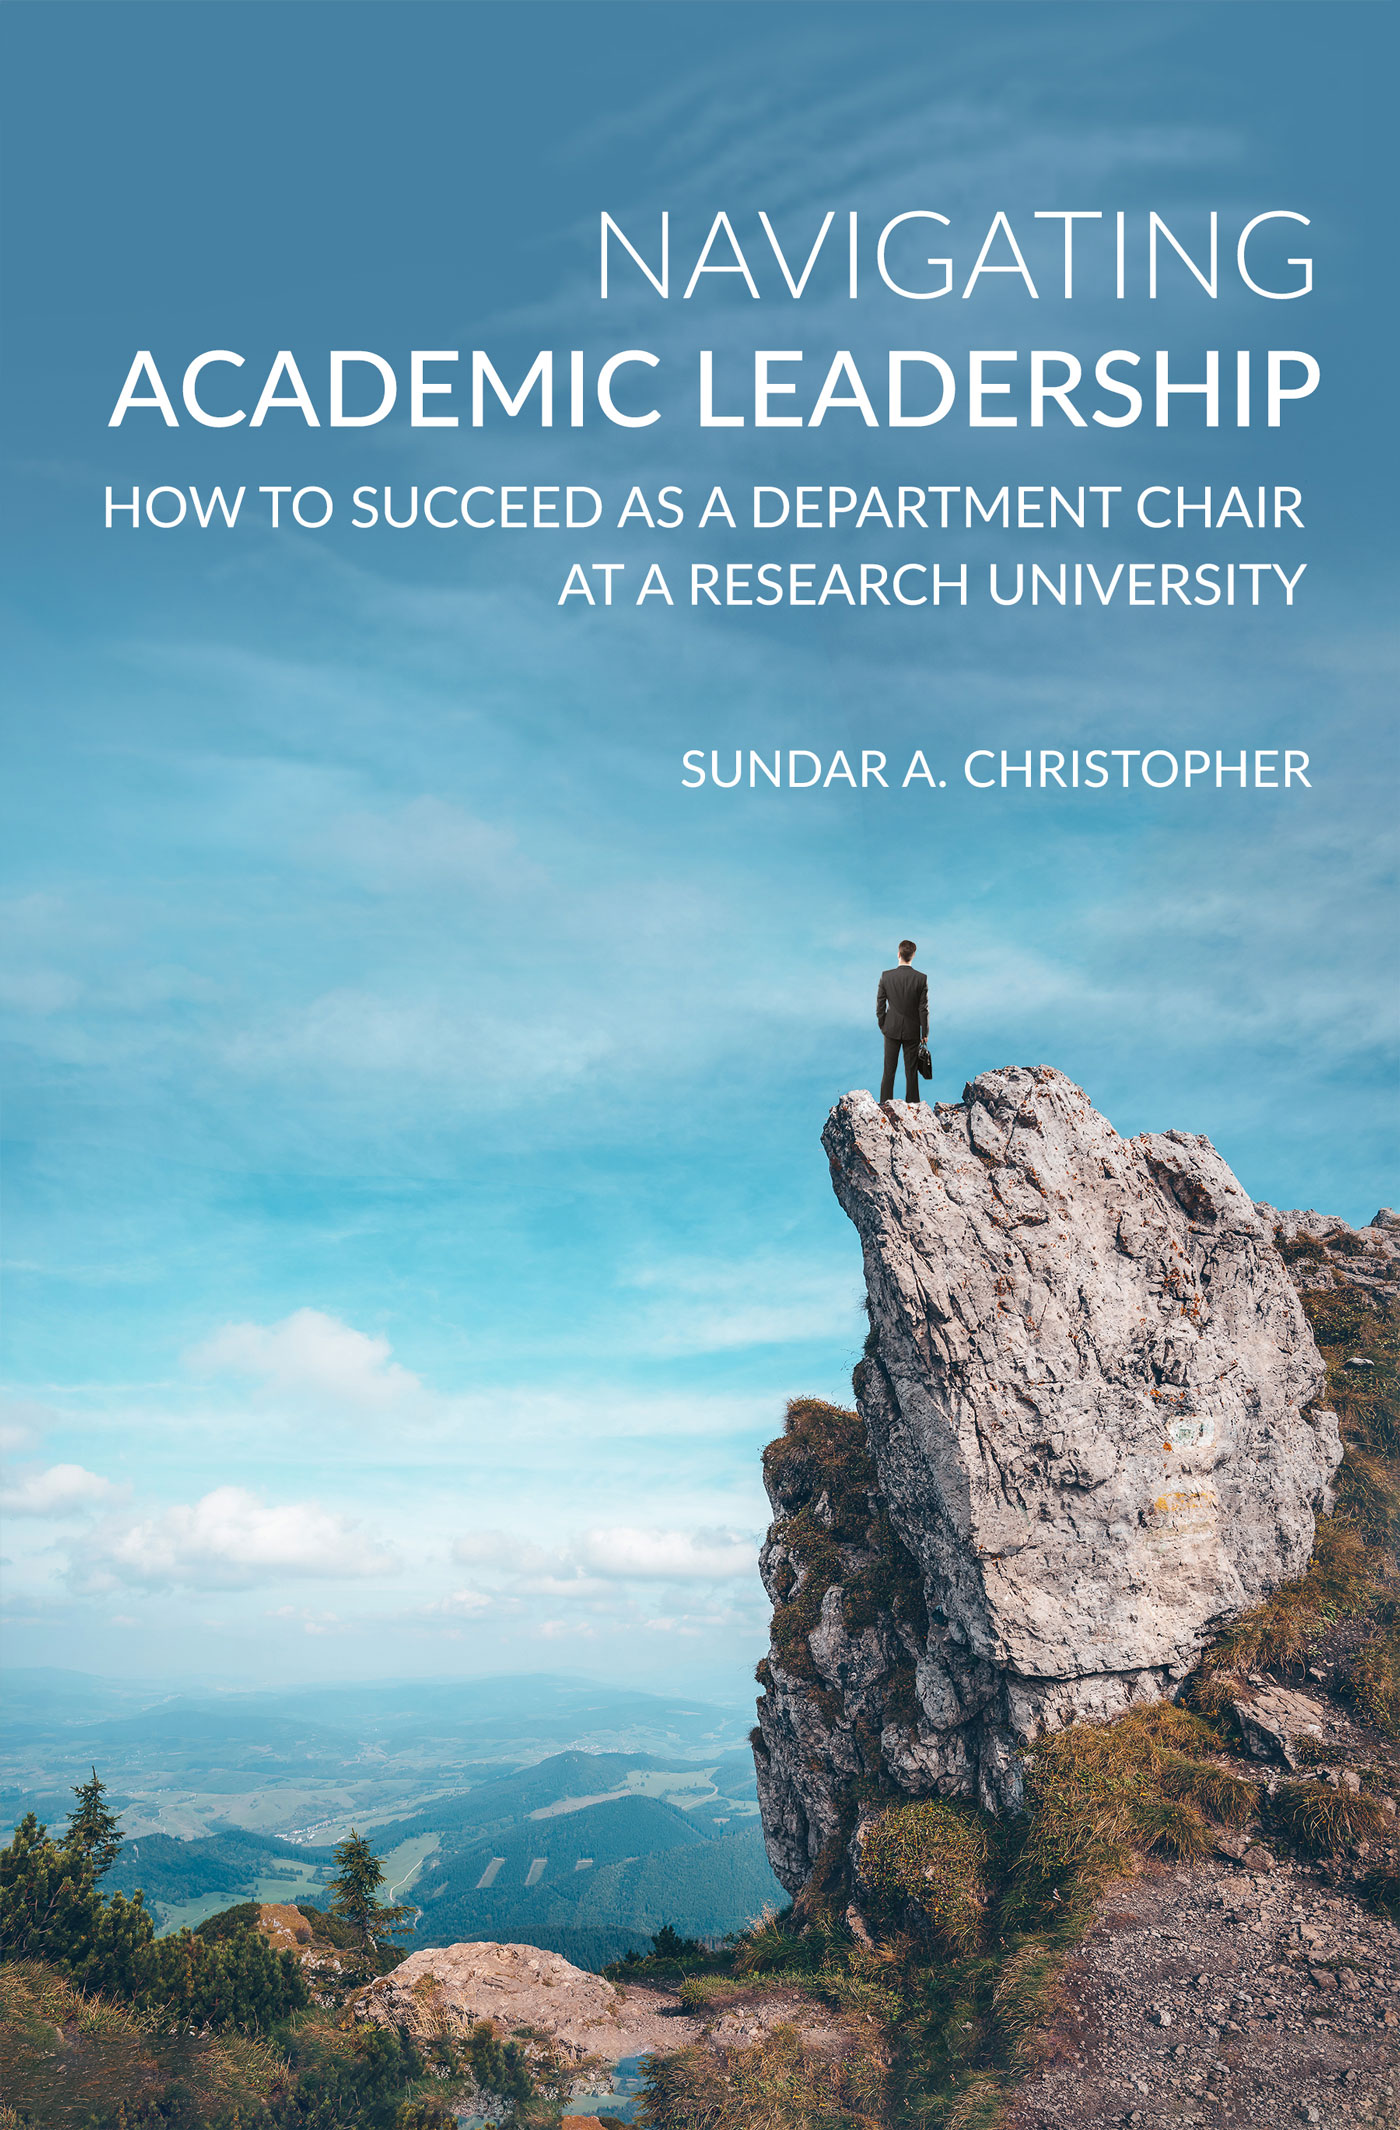 Navigating Academic Leadership: How to Succeed as a Department Chair at a Research University.